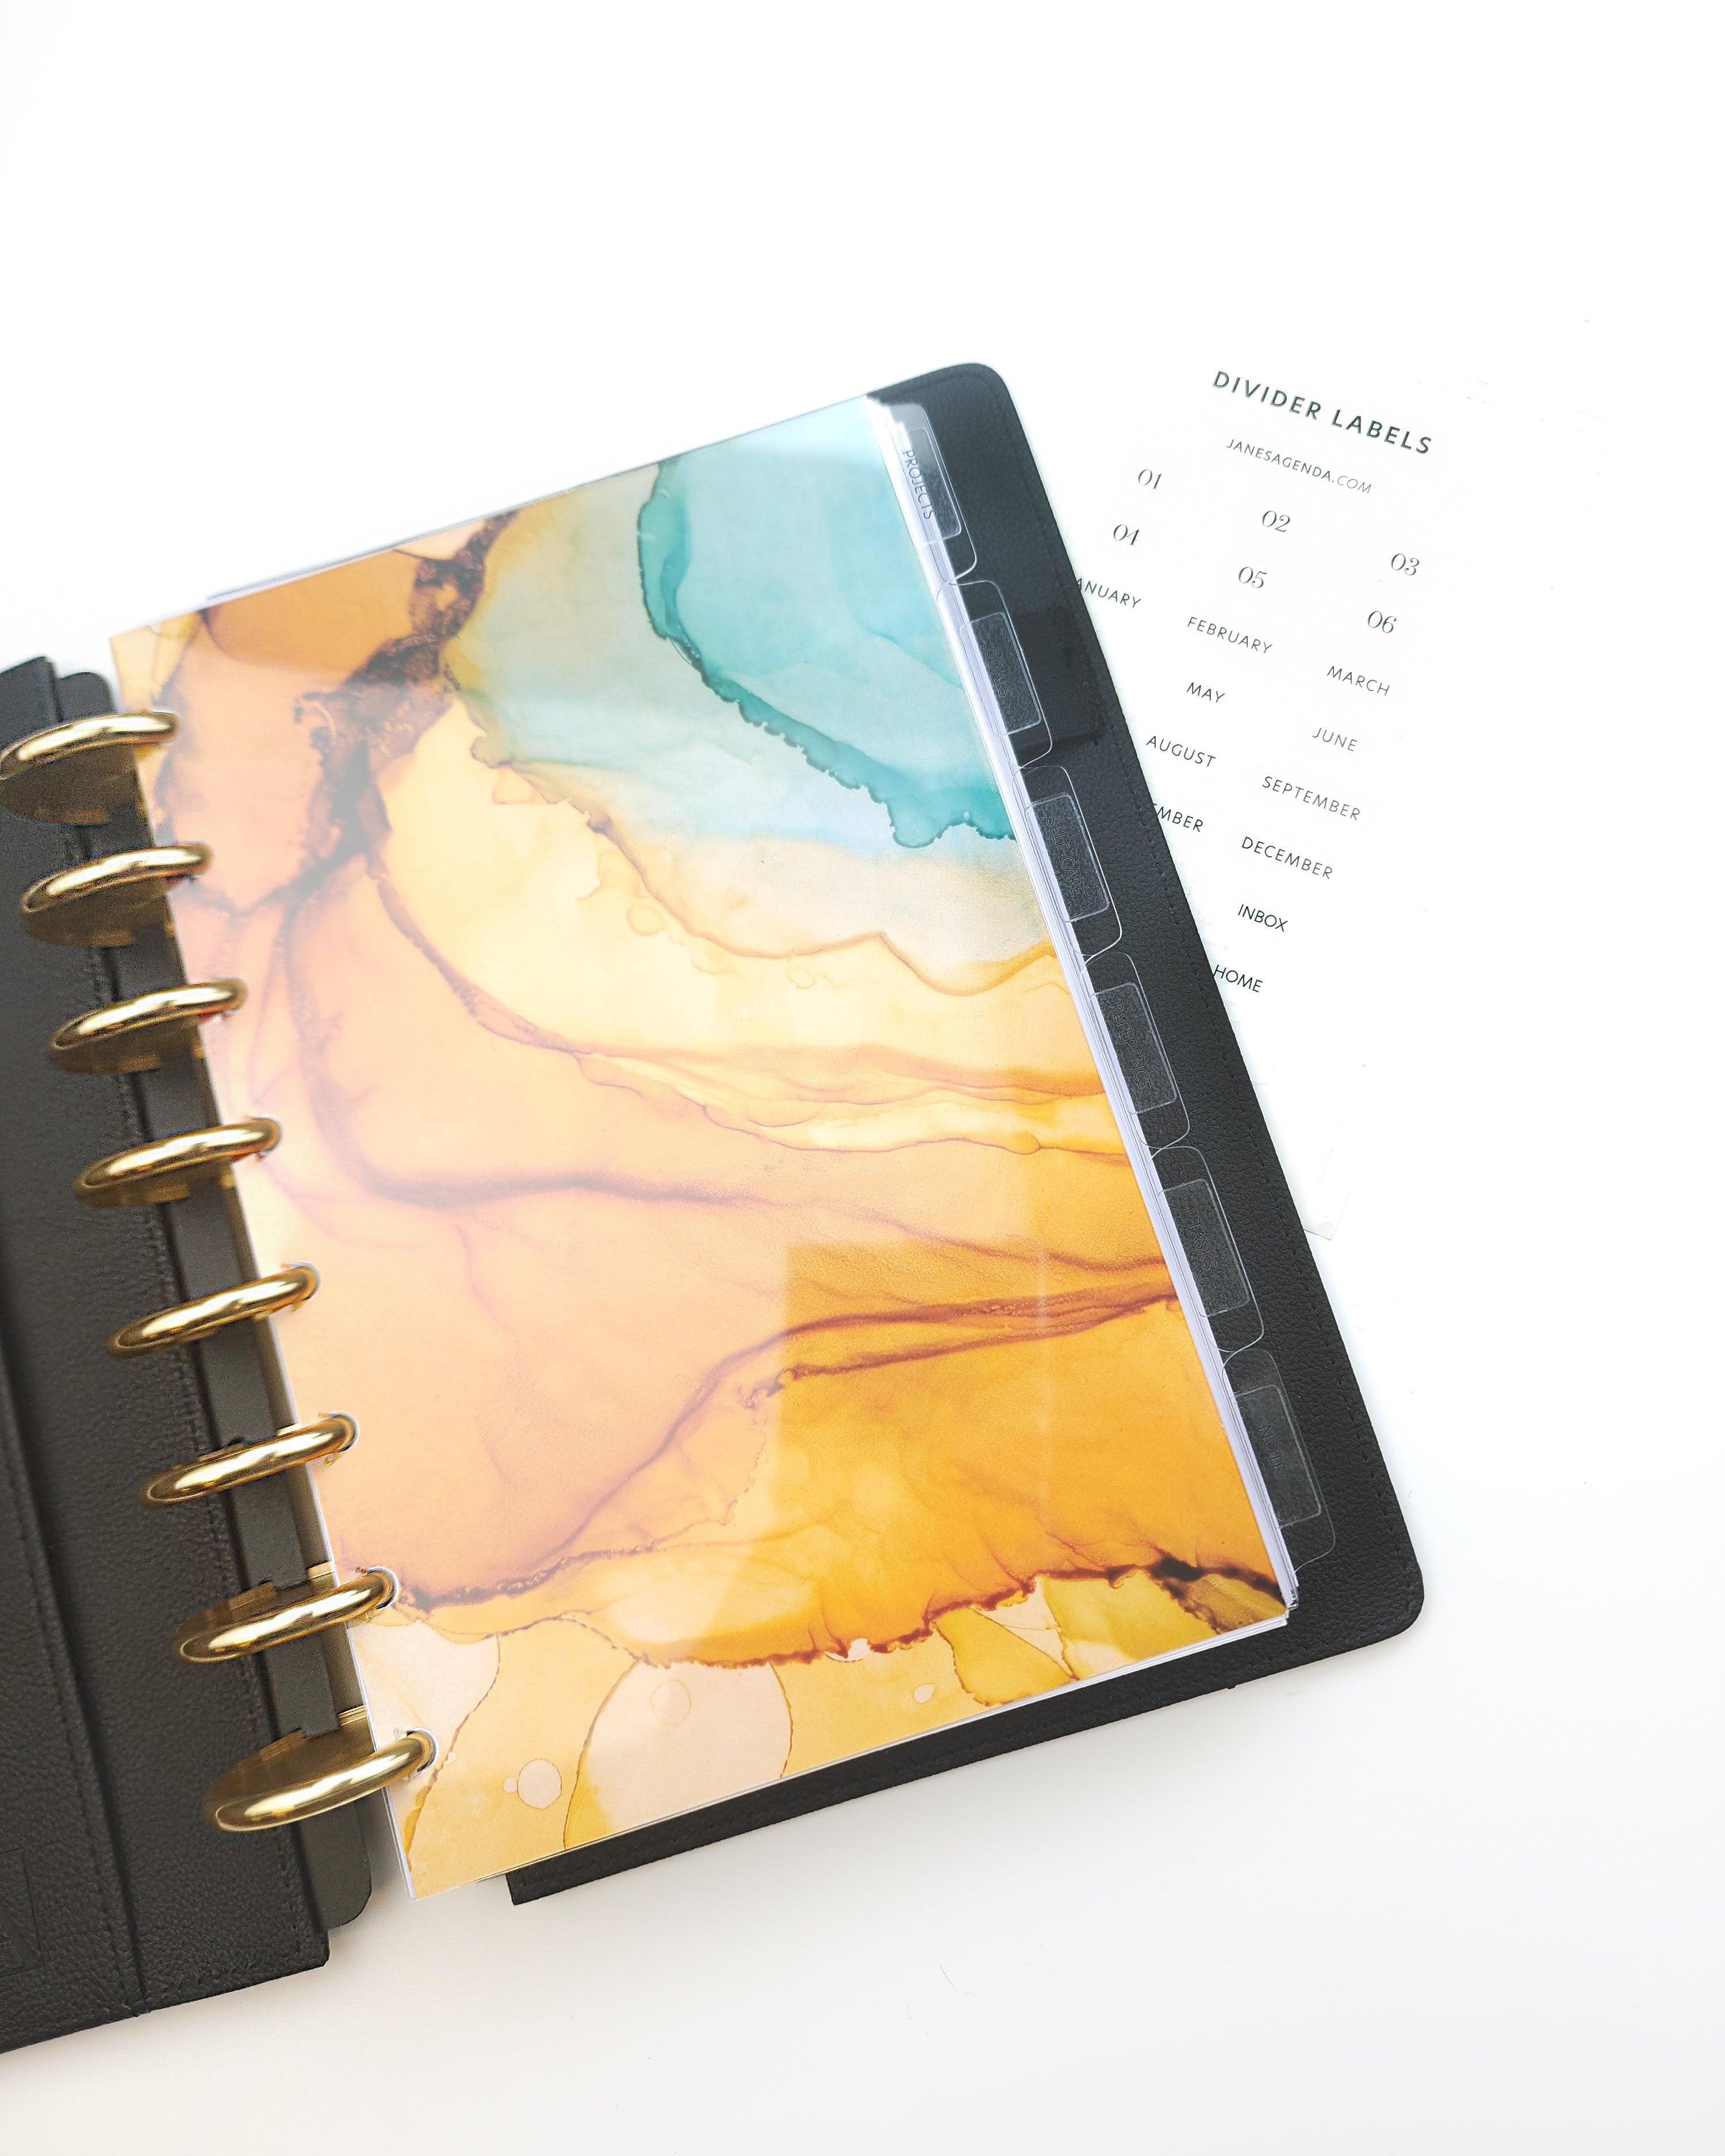 Clear plastic planner dividers that include clear adhesive divider labels to accomadate discbound and six ring planner systems by Jane's Agenda.